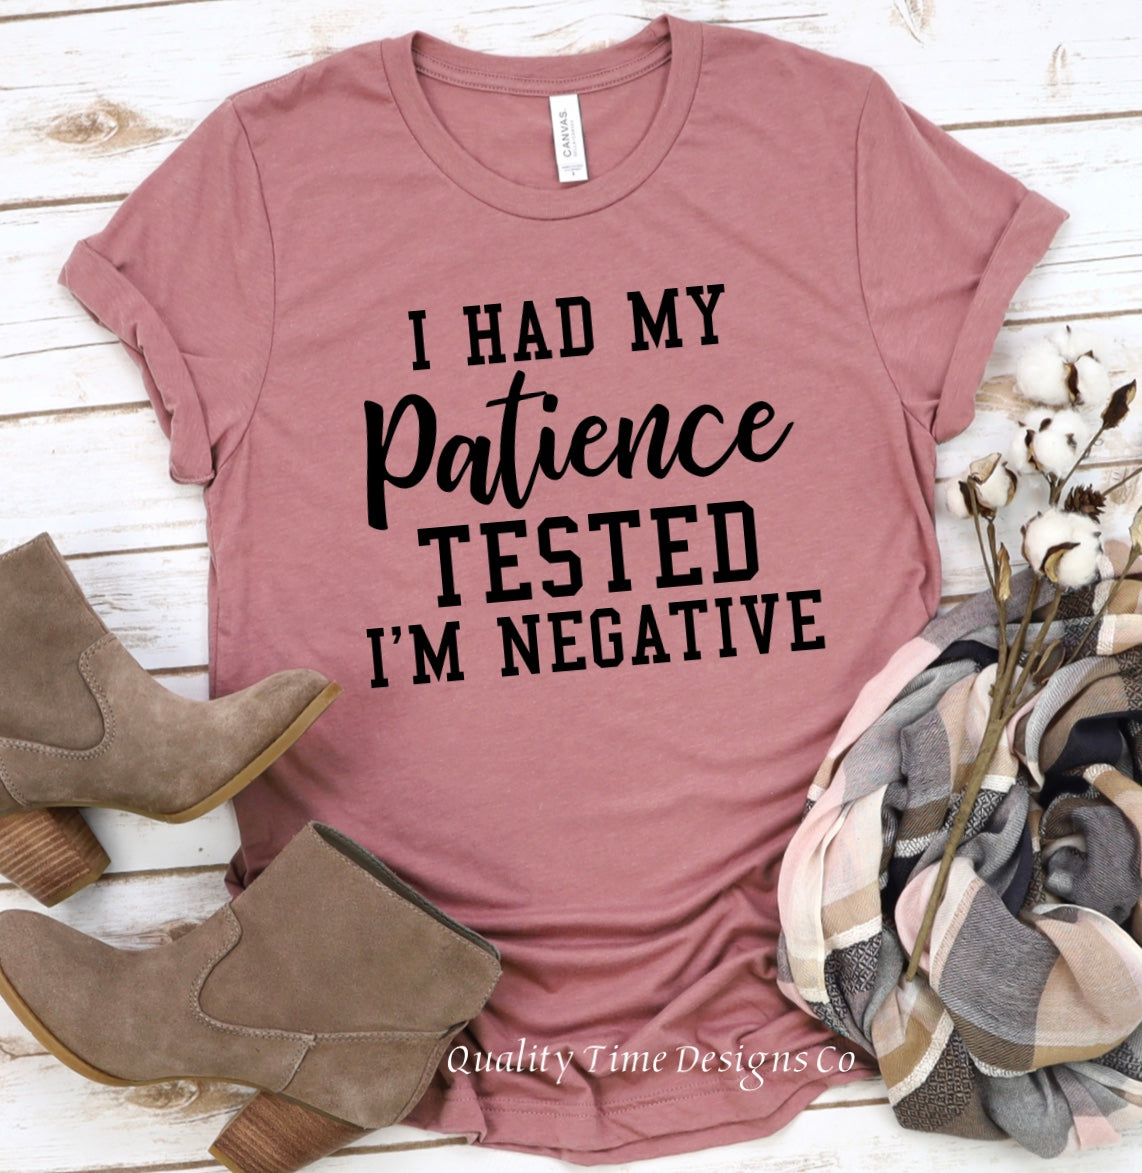 I had my patience tested I’m negative t-shirt 